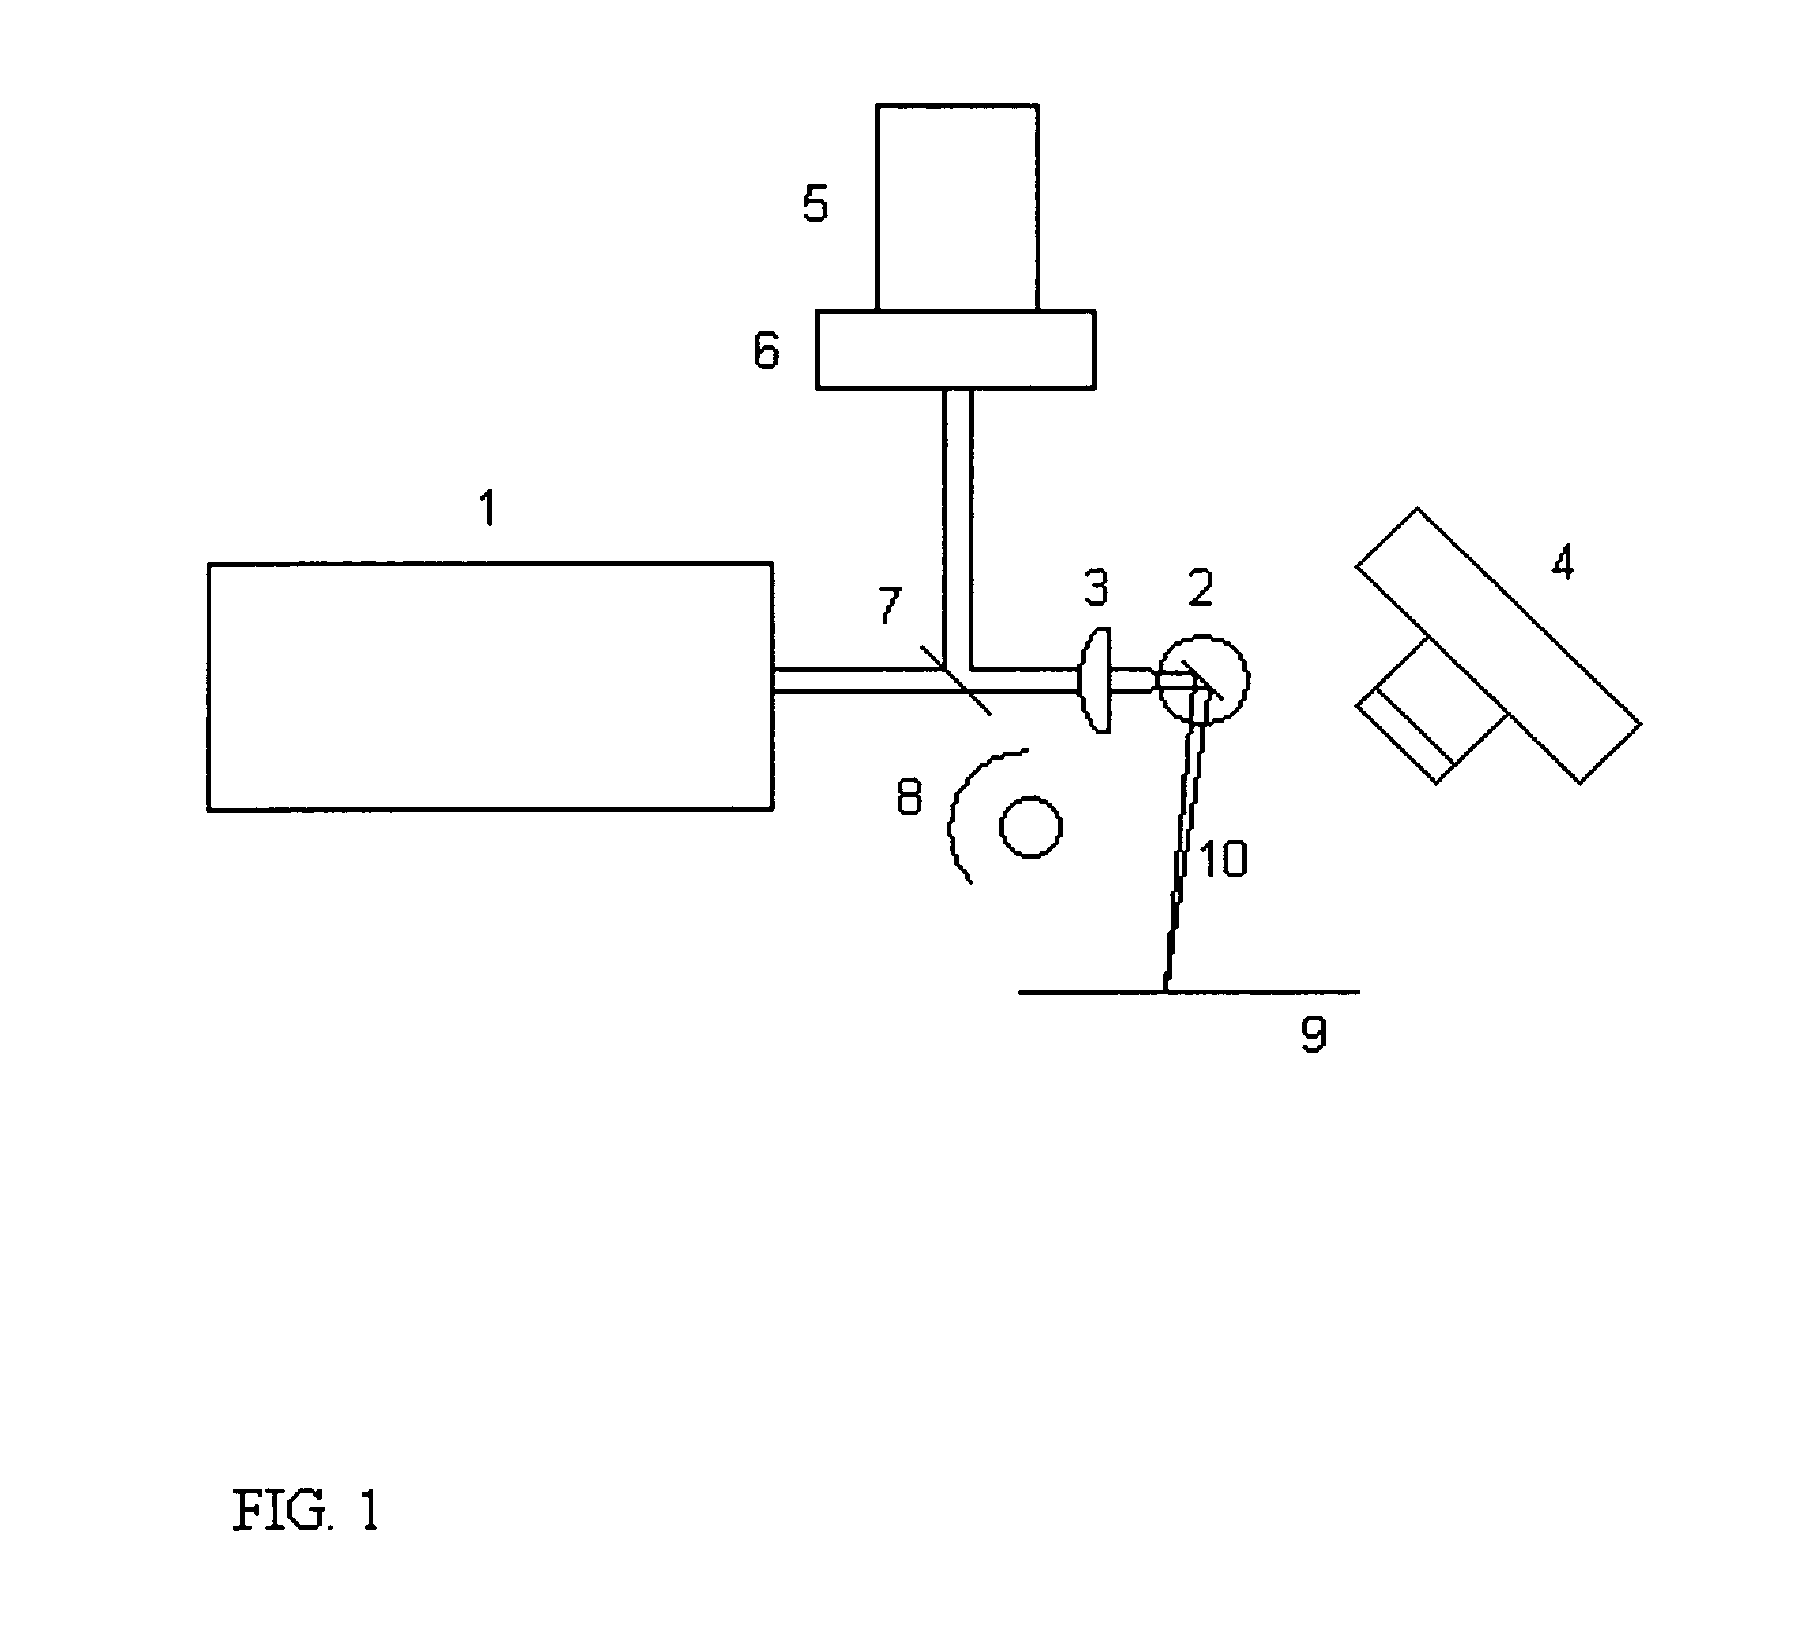 Method and apparatus for detection and analysis of biological materials through laser induced fluorescence